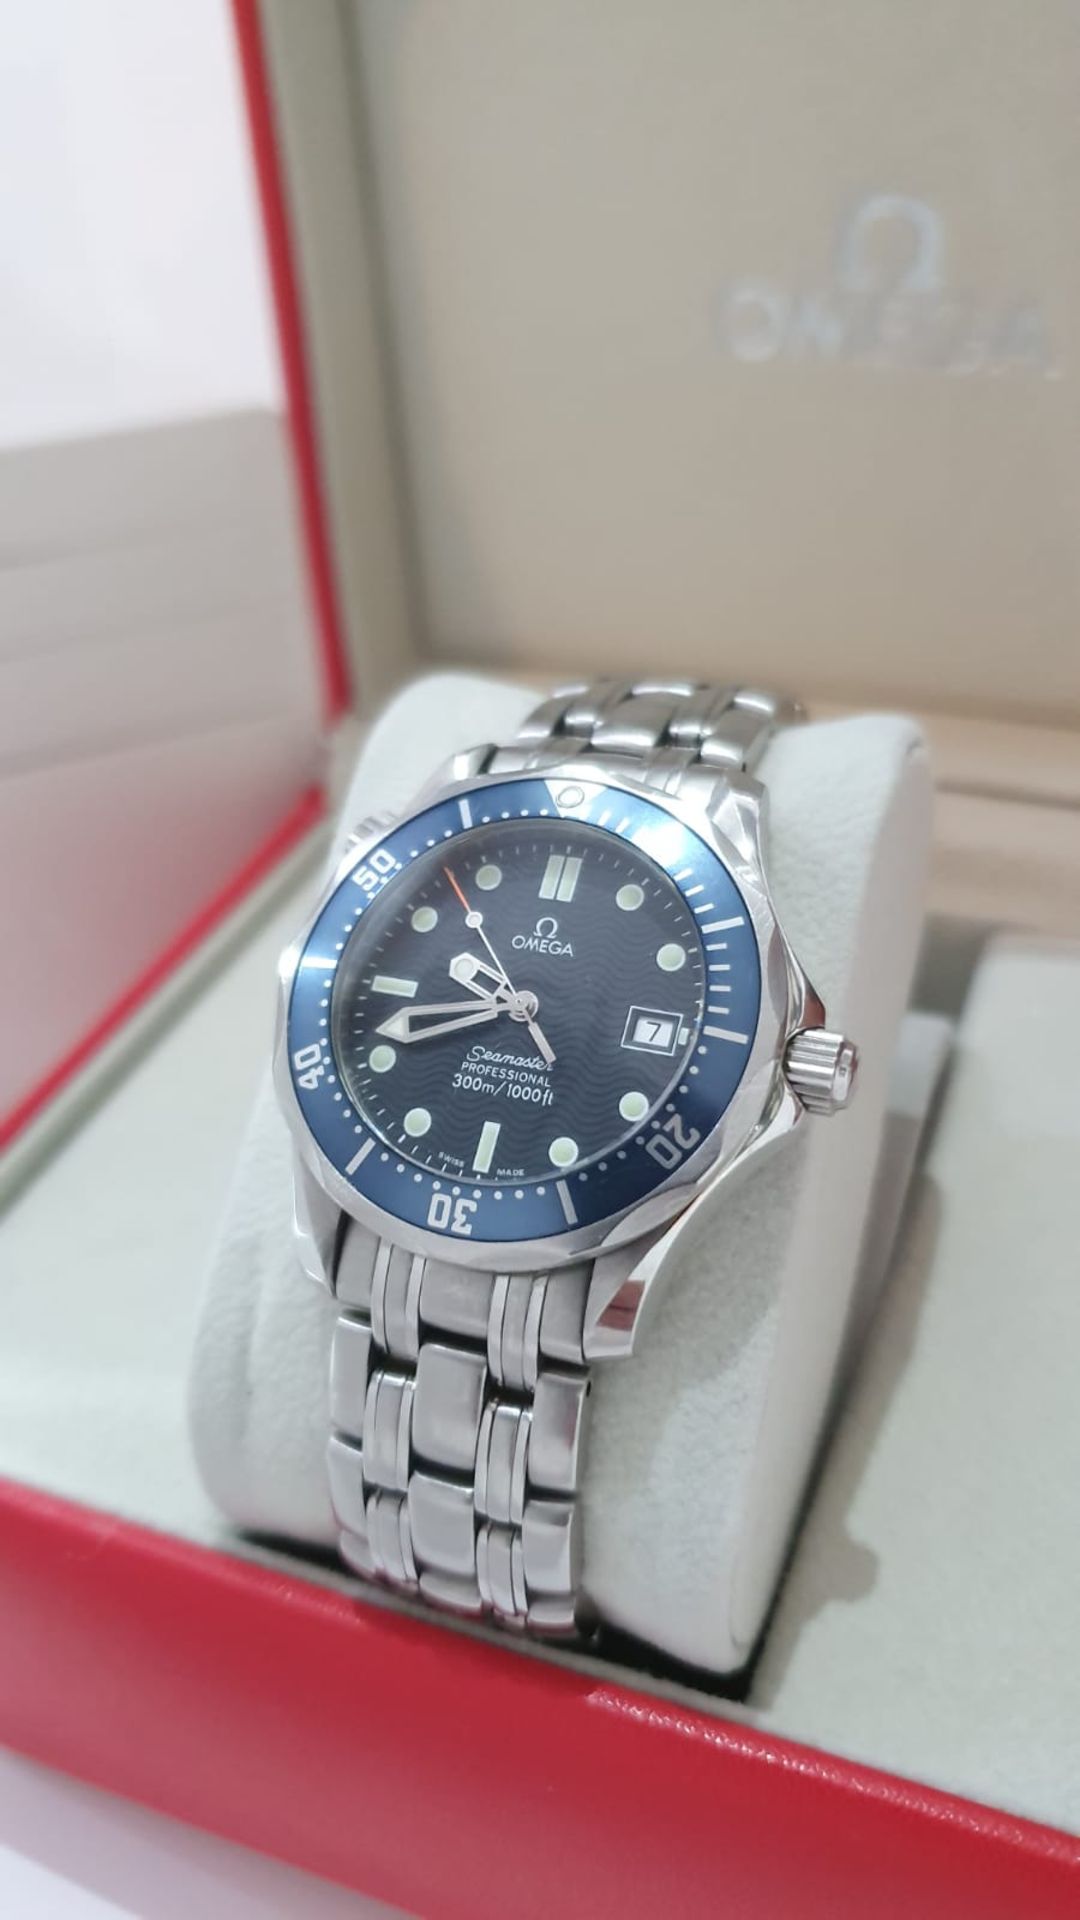 OMEGA SEAMASTER PROFESSIONAL 300m James Bond Navy Blue Wave Dial Swiss Mens Watch - Image 4 of 12